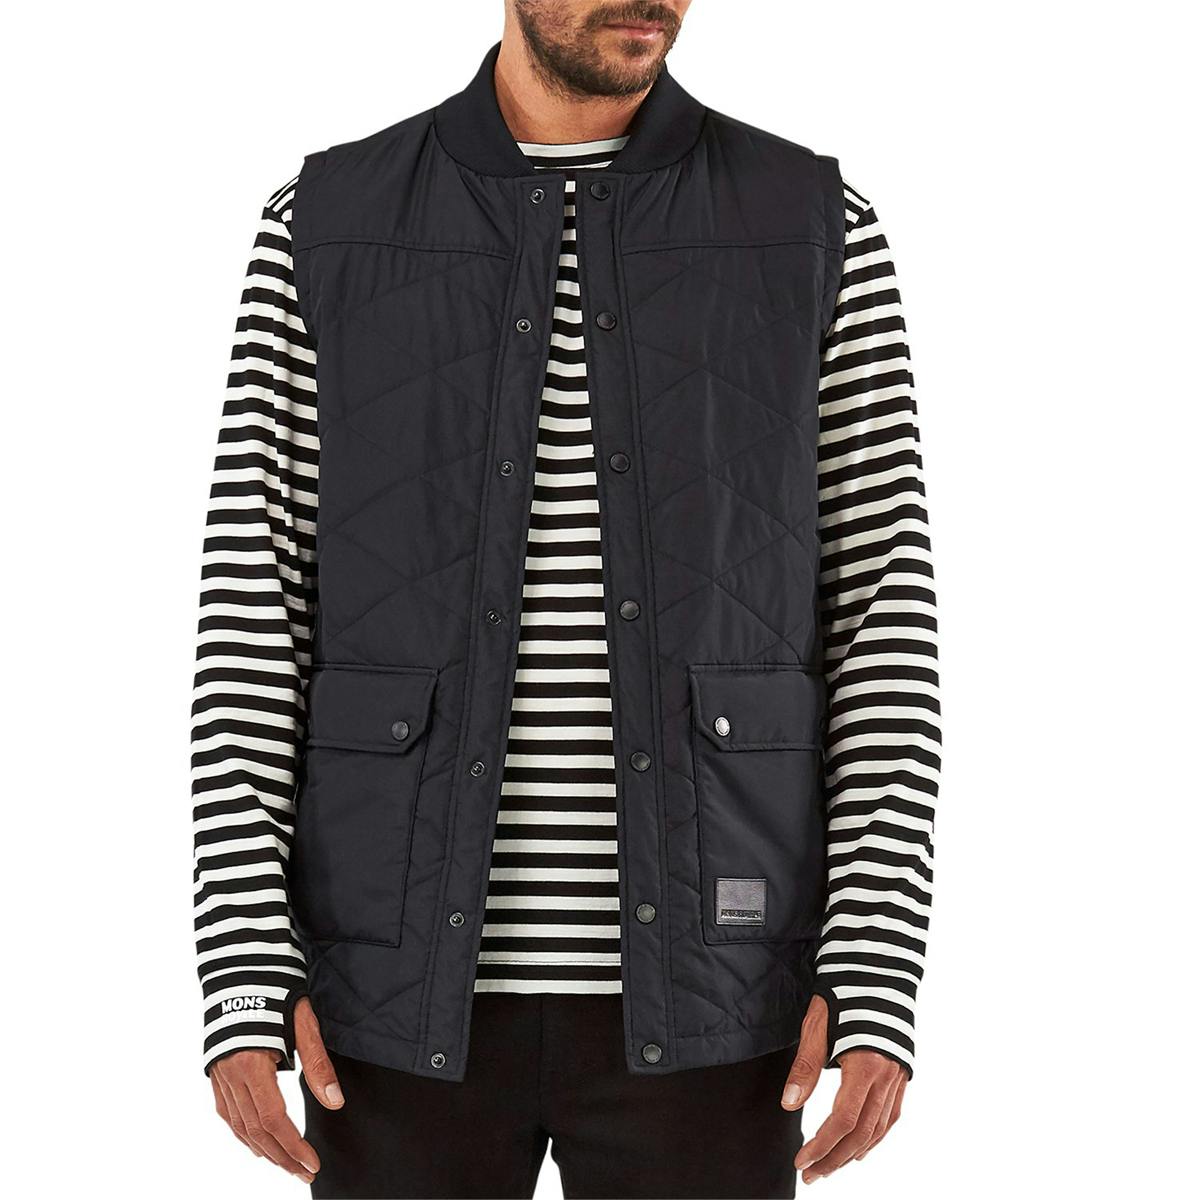 Mons Royale Men's The Keeper Insulated Vest